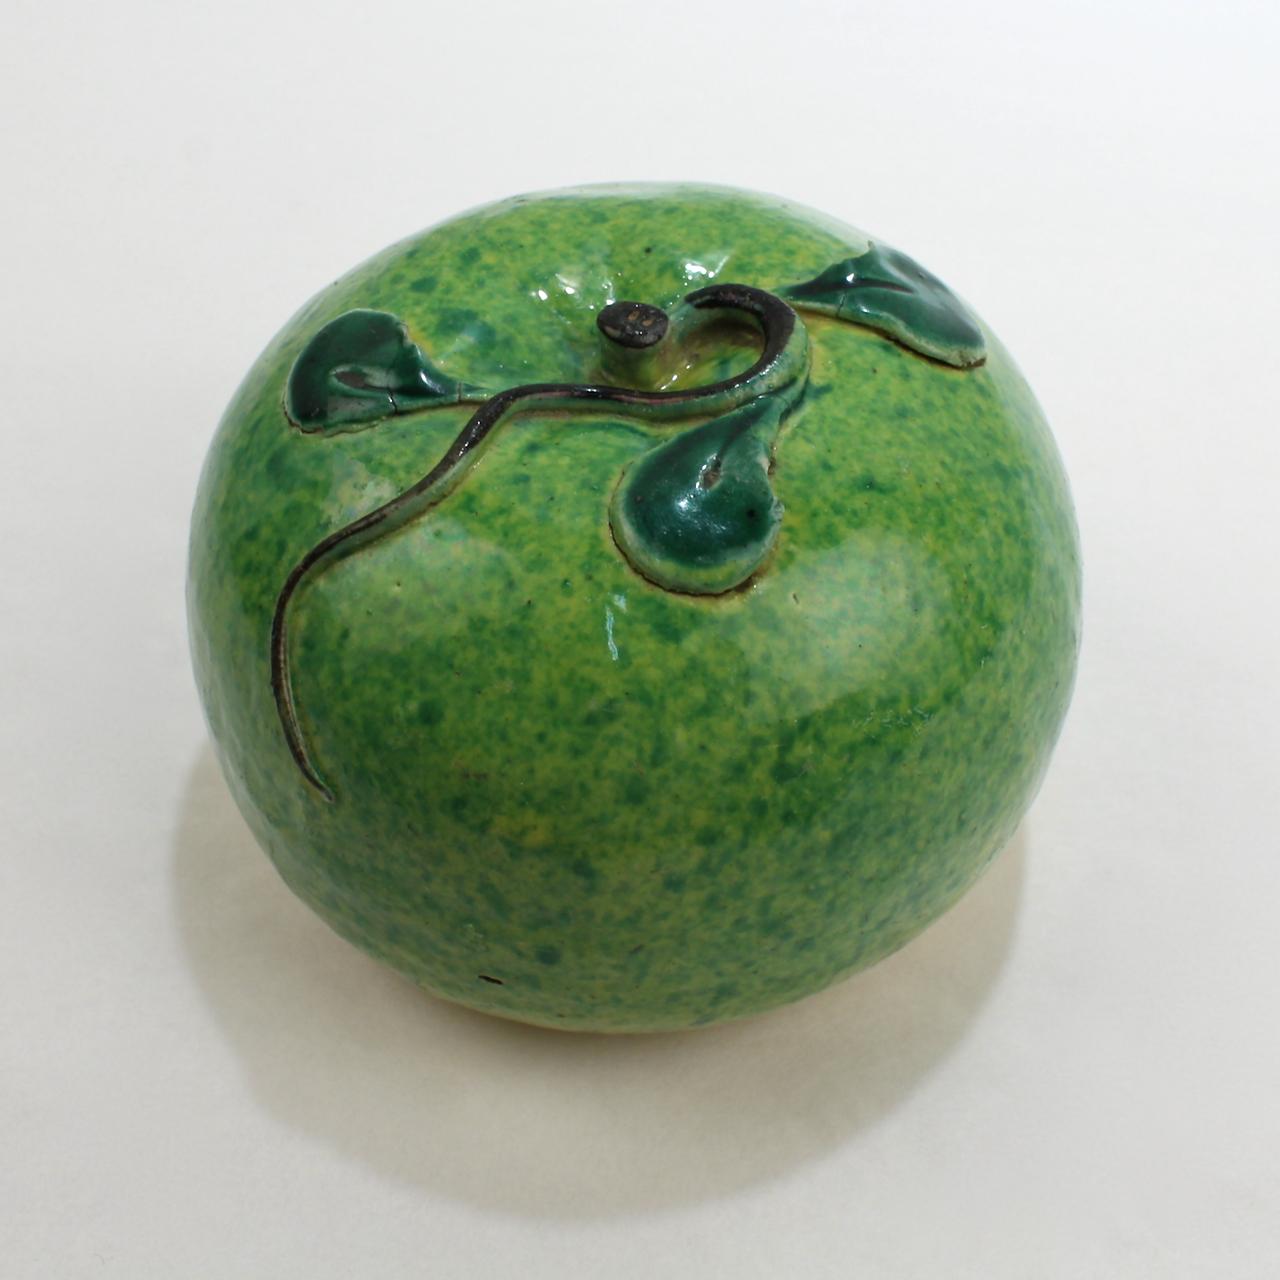 A fine piece of Chinese Altar fruit.

In the form of a green apple.

Simply a wonderful piece!

Provenance: 
From the estate of Susan & John Gutfreund (The 'King of Wall Street').

Date:
Early 20th century or earlier

Marks: 
Unmarked

Overall